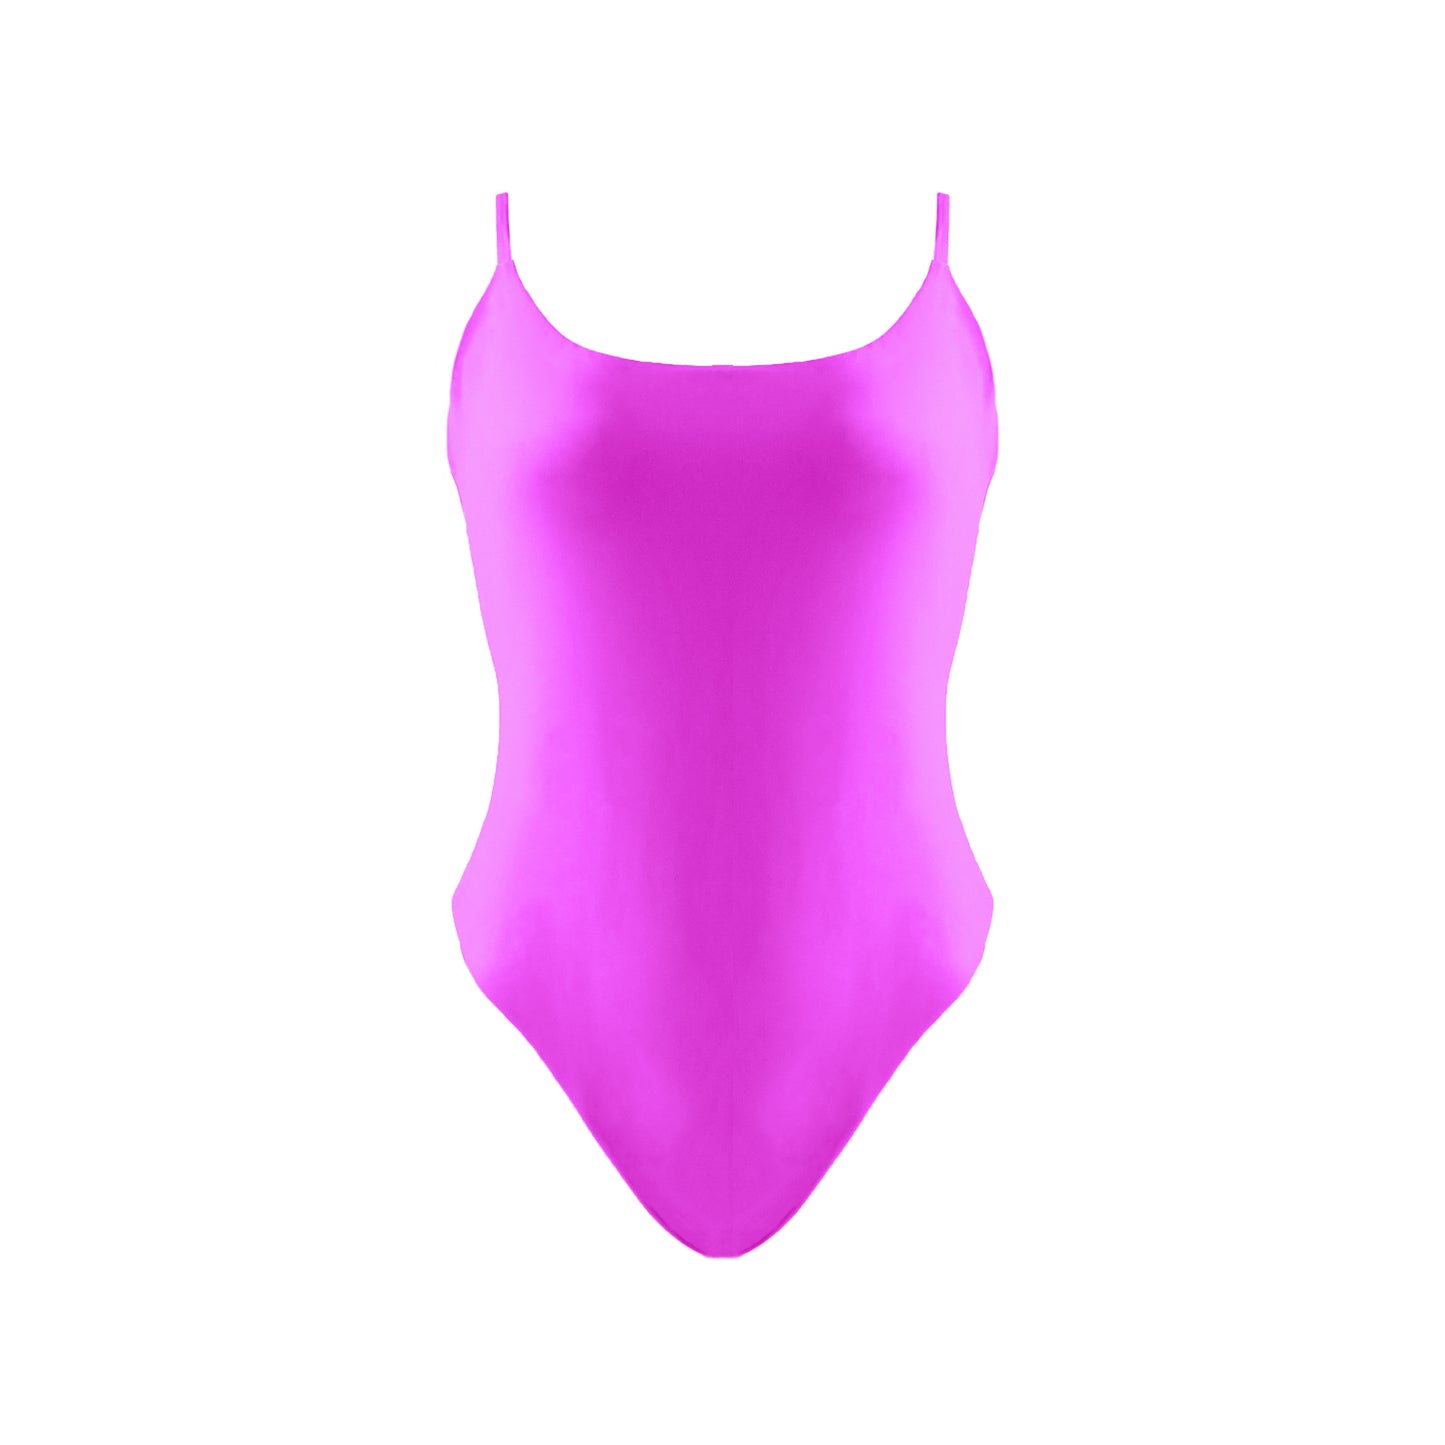 Barbie pink Simplistic scoop neck one piece swimsuit with tie back, high cut legs and cheeky bum coverage.